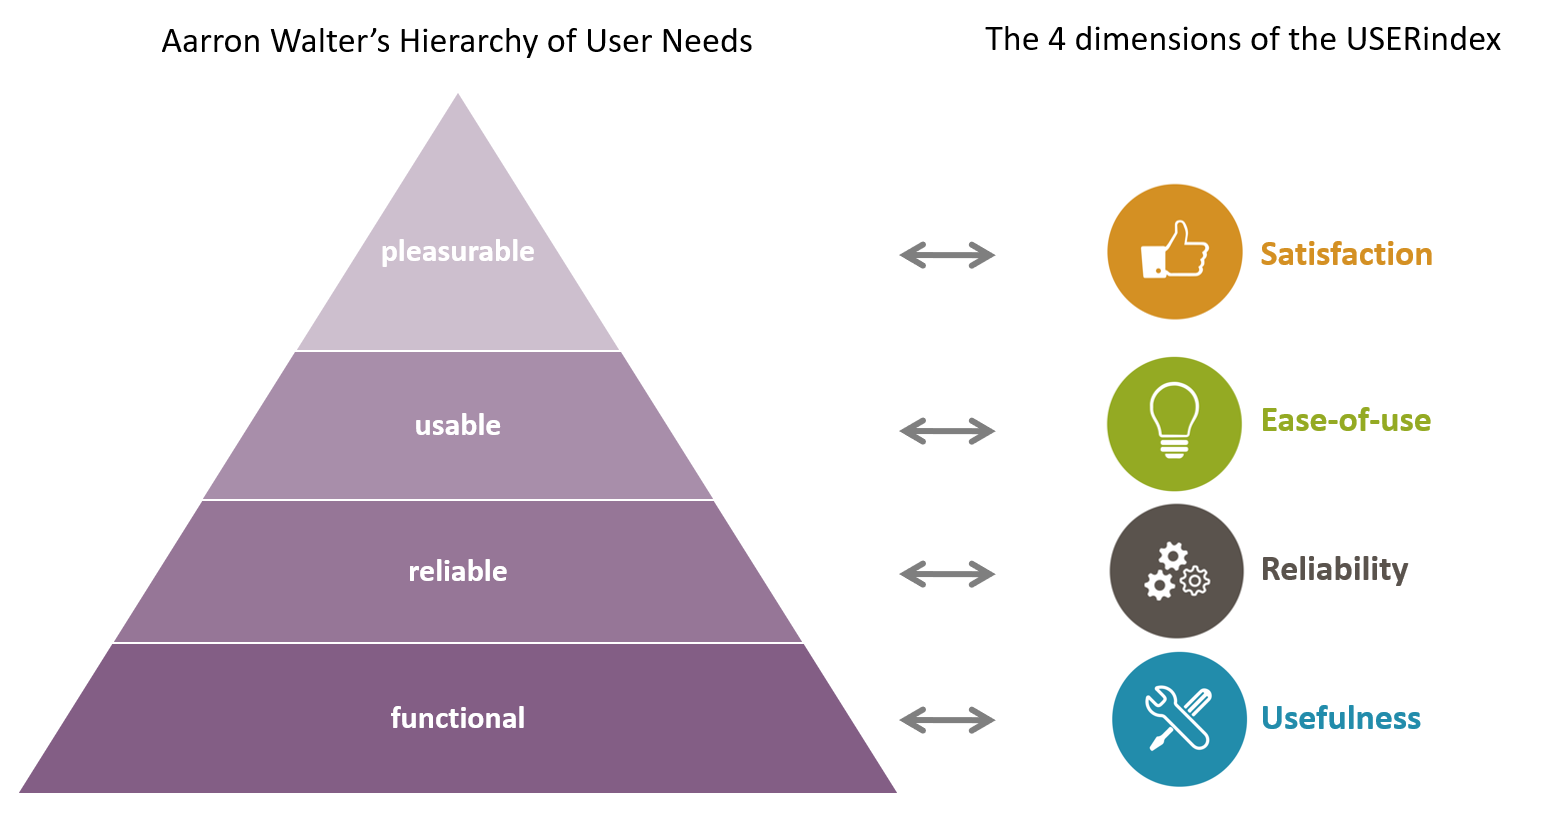 Mapping-of-Aarron-Walters-Hierarchy-of-User-Needs-to-USERindex-dimensions